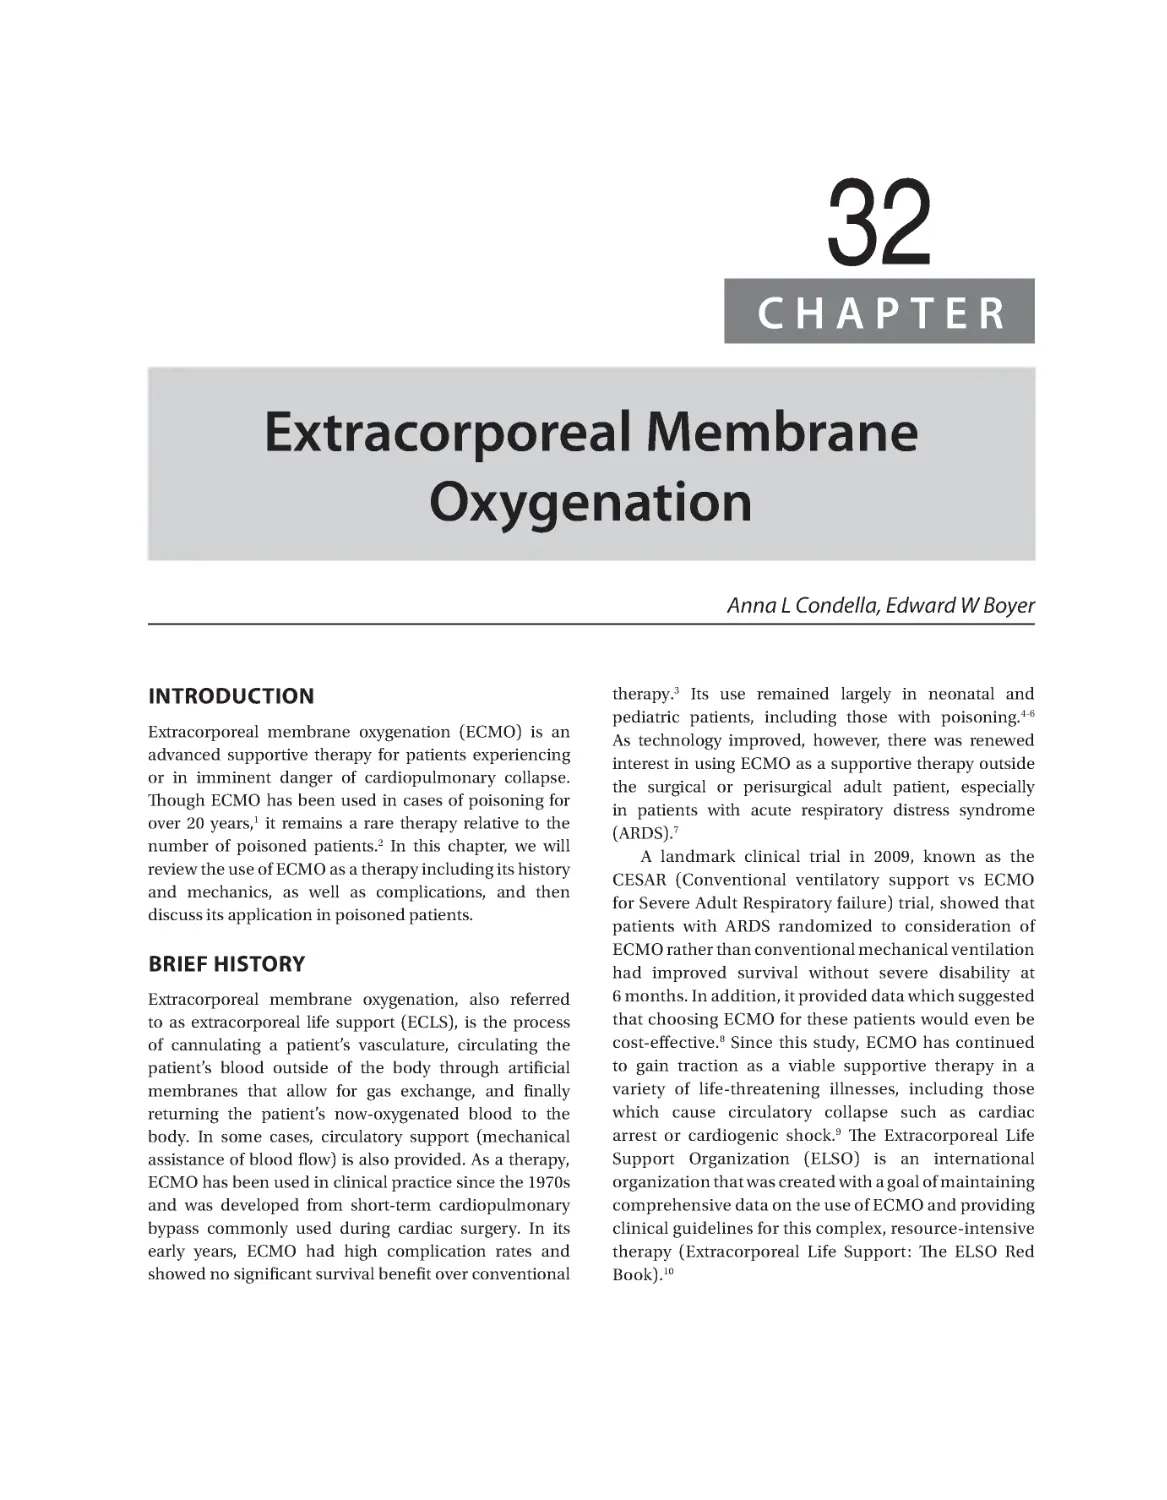 Chapter 32: Extracorporeal Membrane Oxygenation